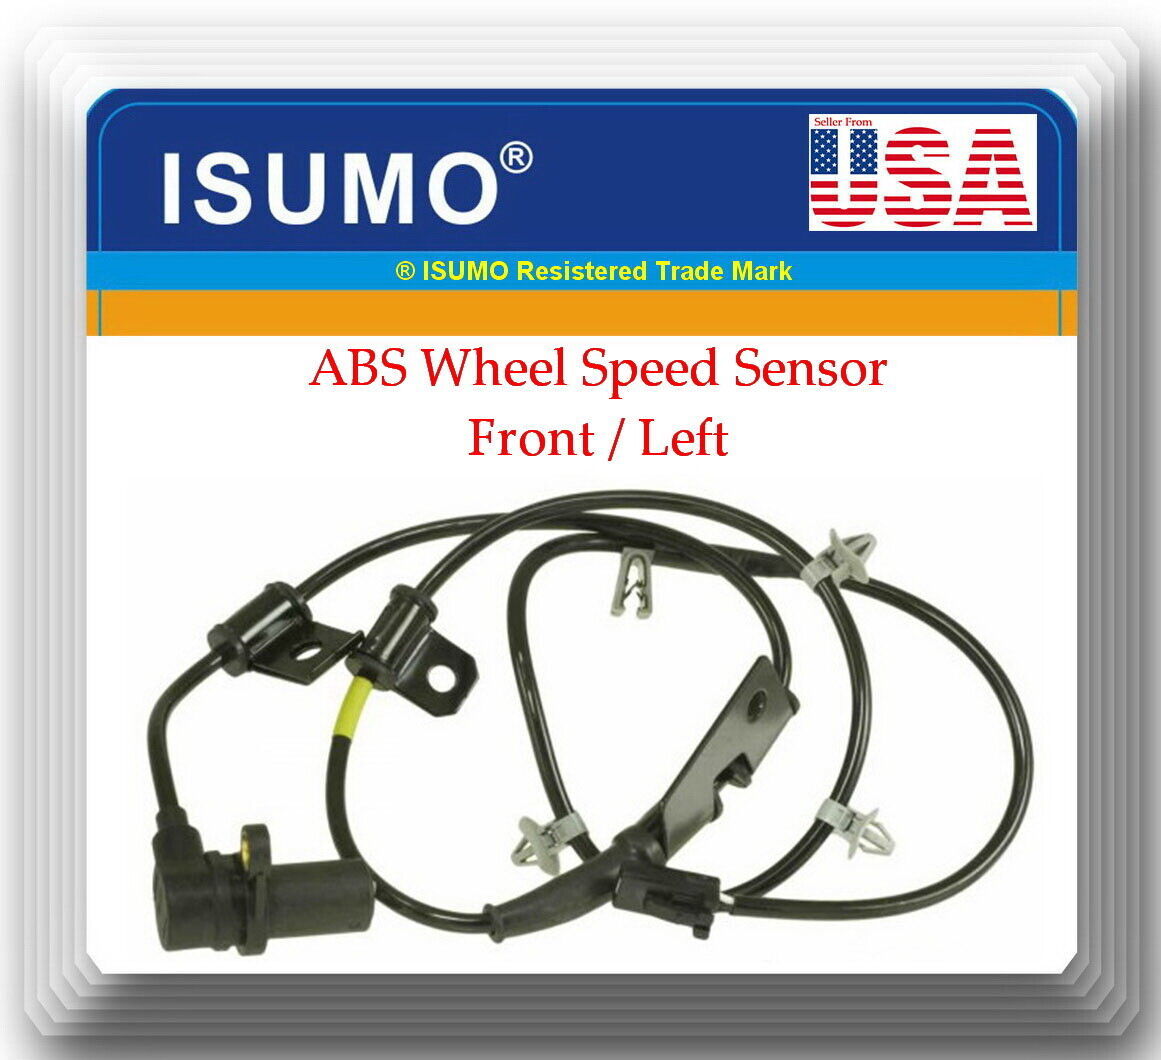 Primary image for 95670-2D050 ABS Wheel Speed Sensor Front Left for 2001-2006 Hyundai Elantra 2.0L